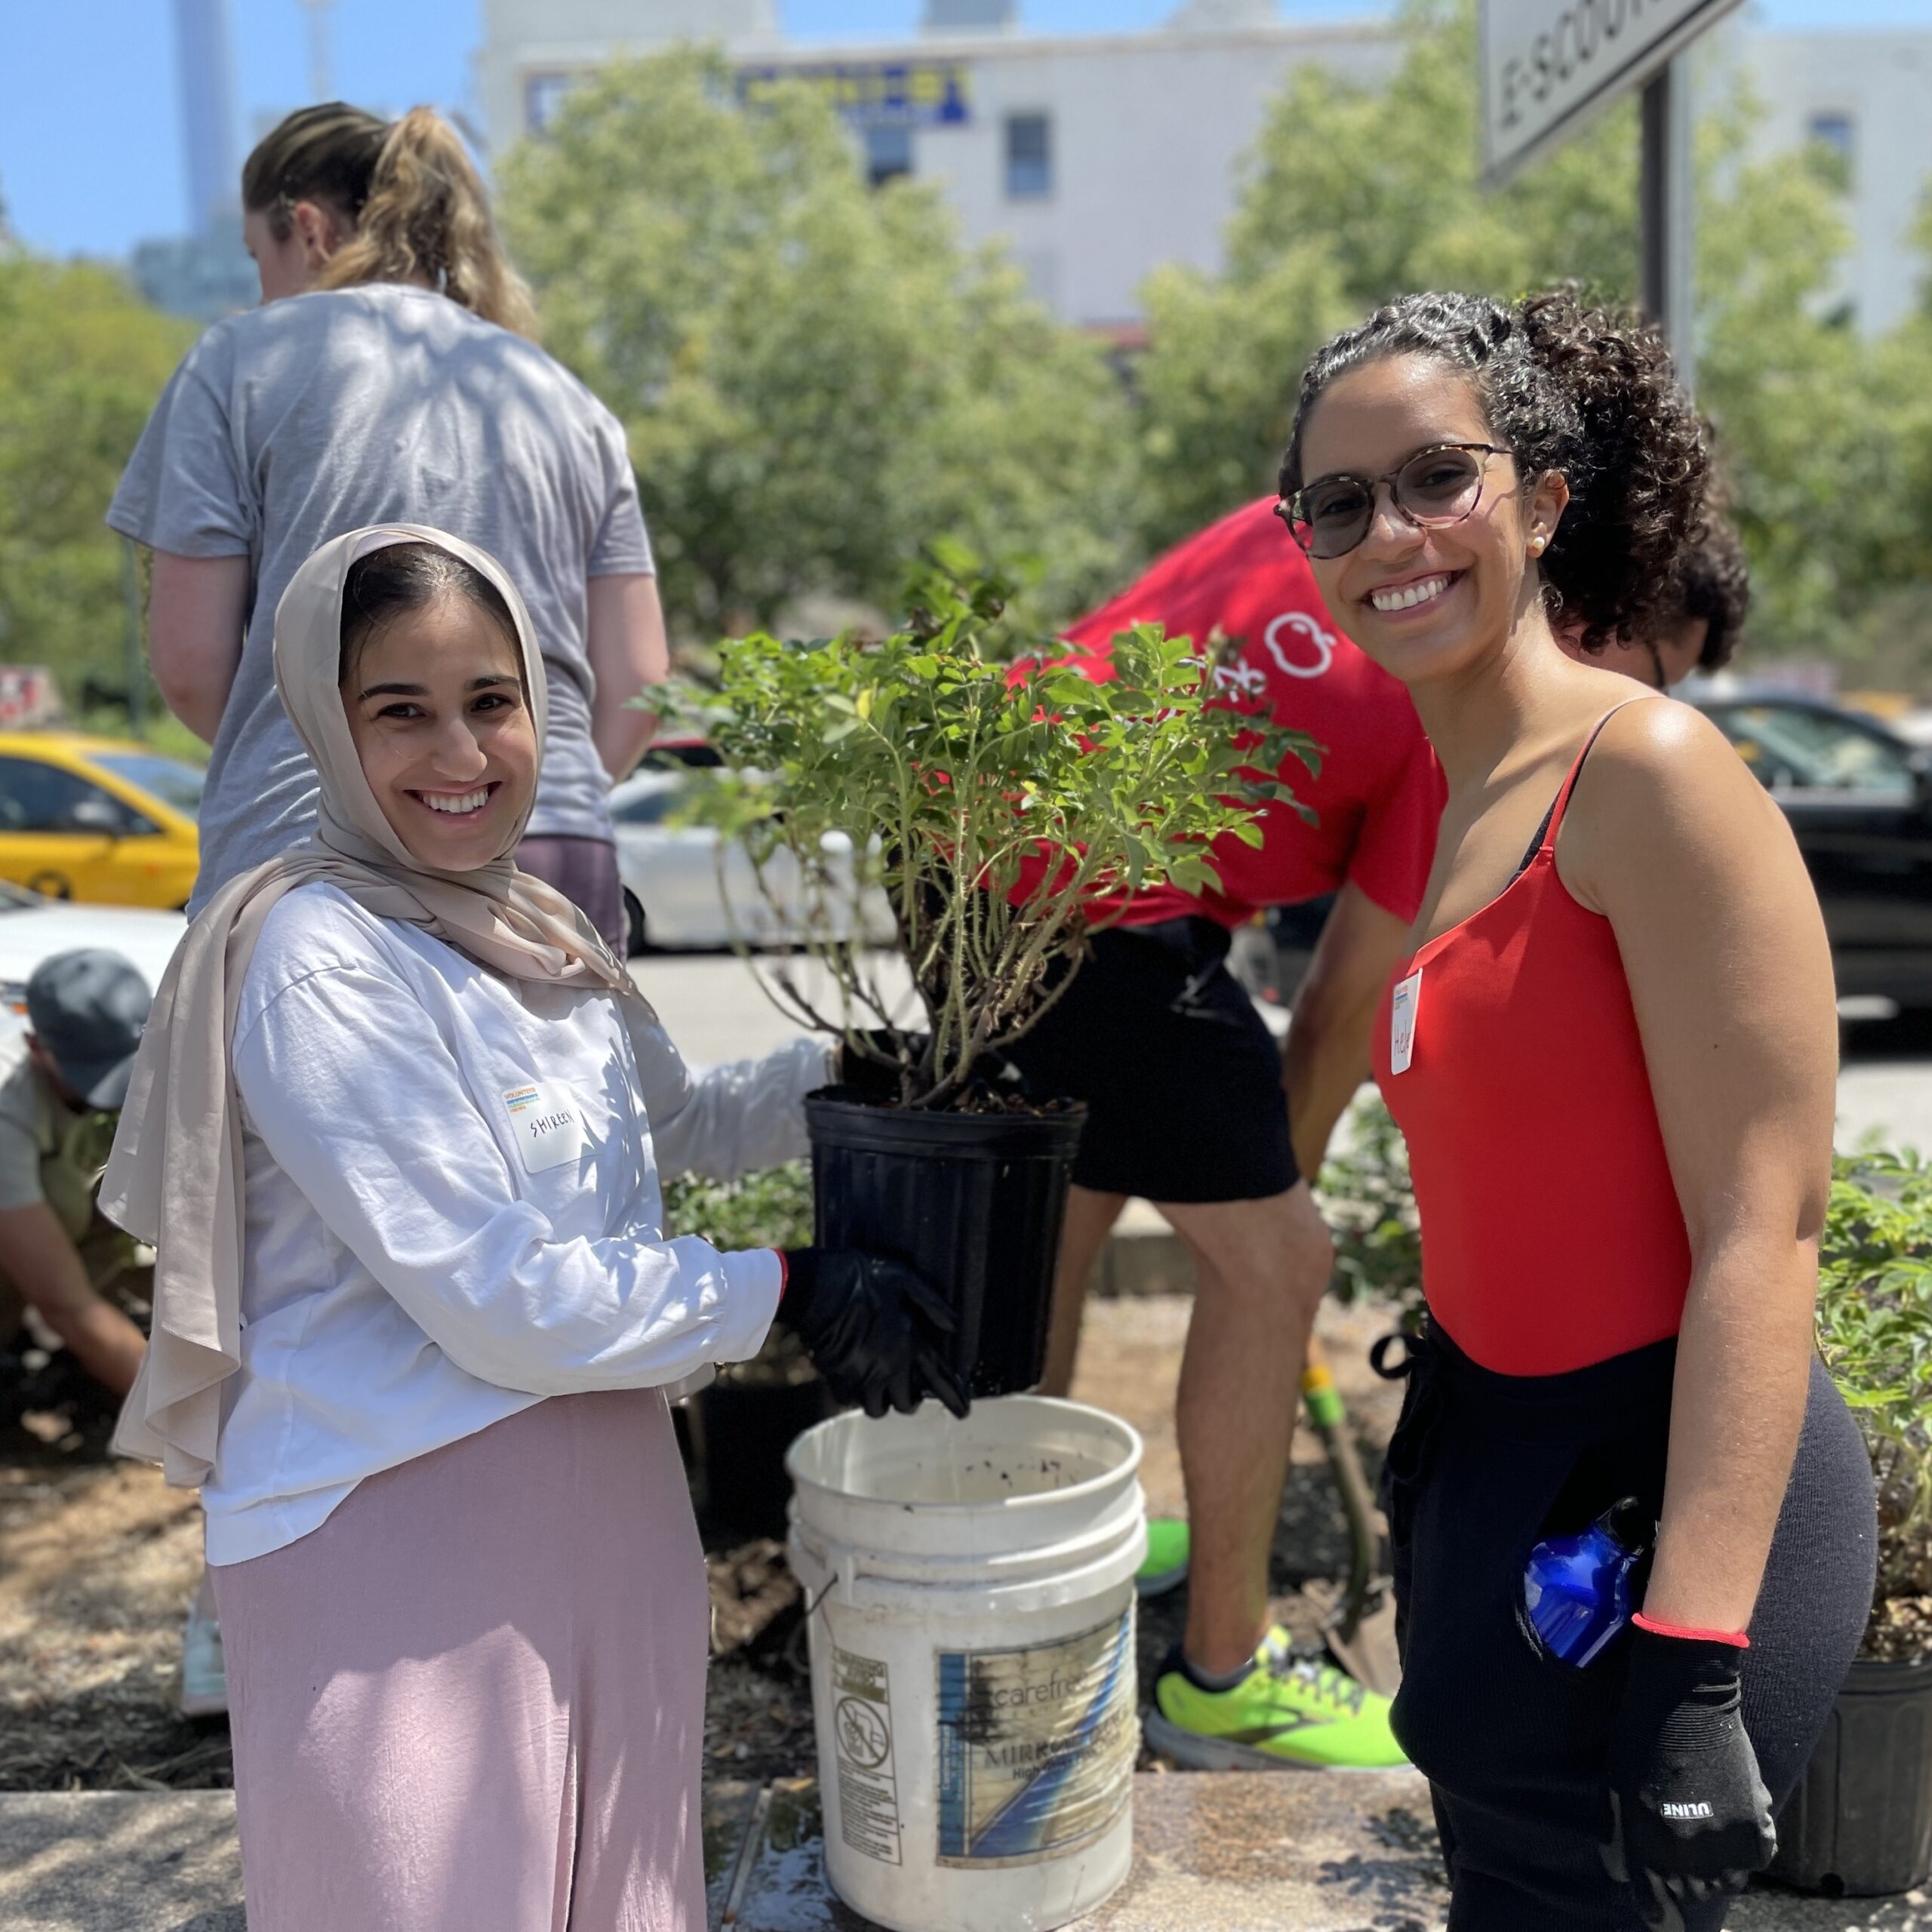 Two volunteers posing with a potted plant during a Park garden project